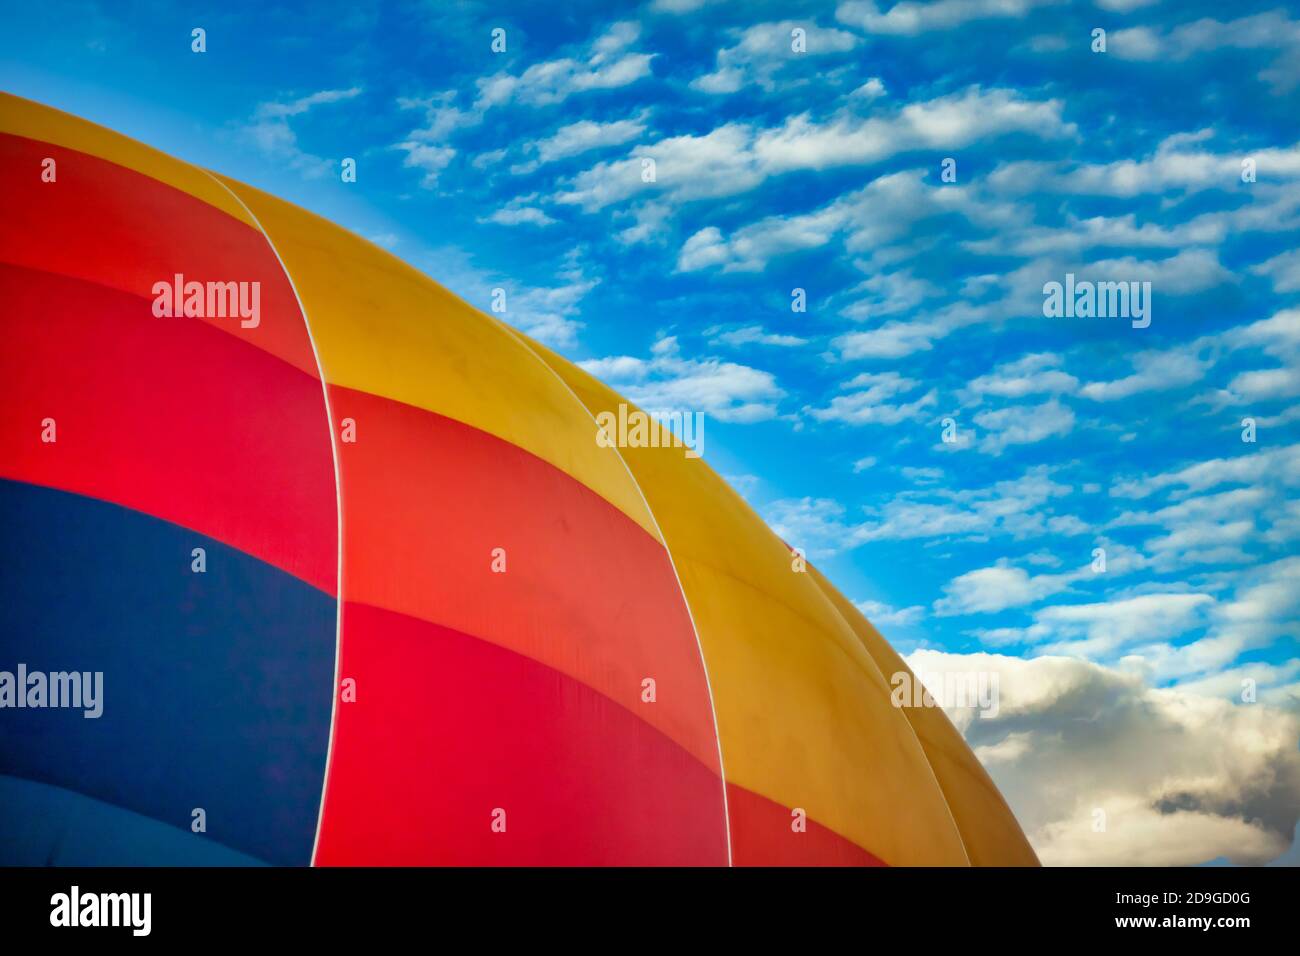 Multicolored balloon against the blue sky Stock Photo